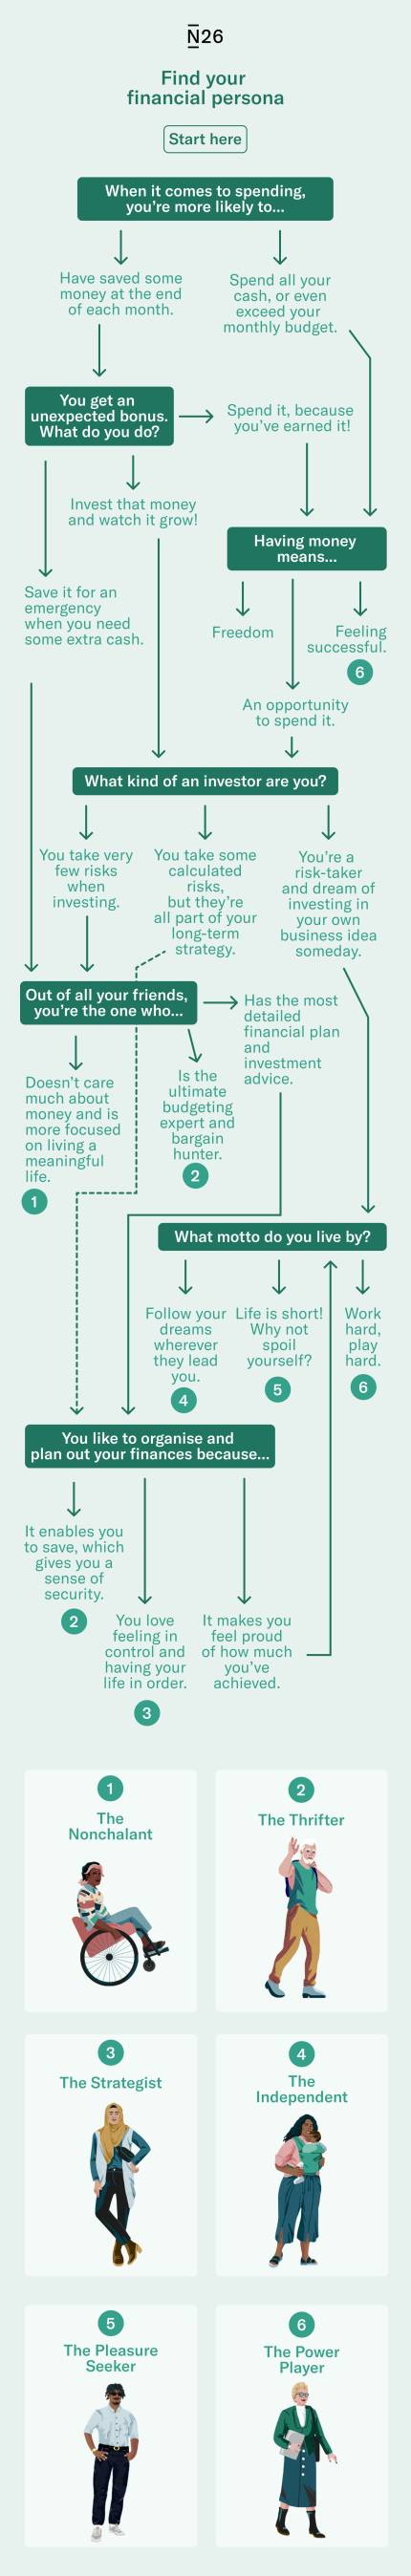 Infographic that shows what is the type of financial personality based on questions and answers.